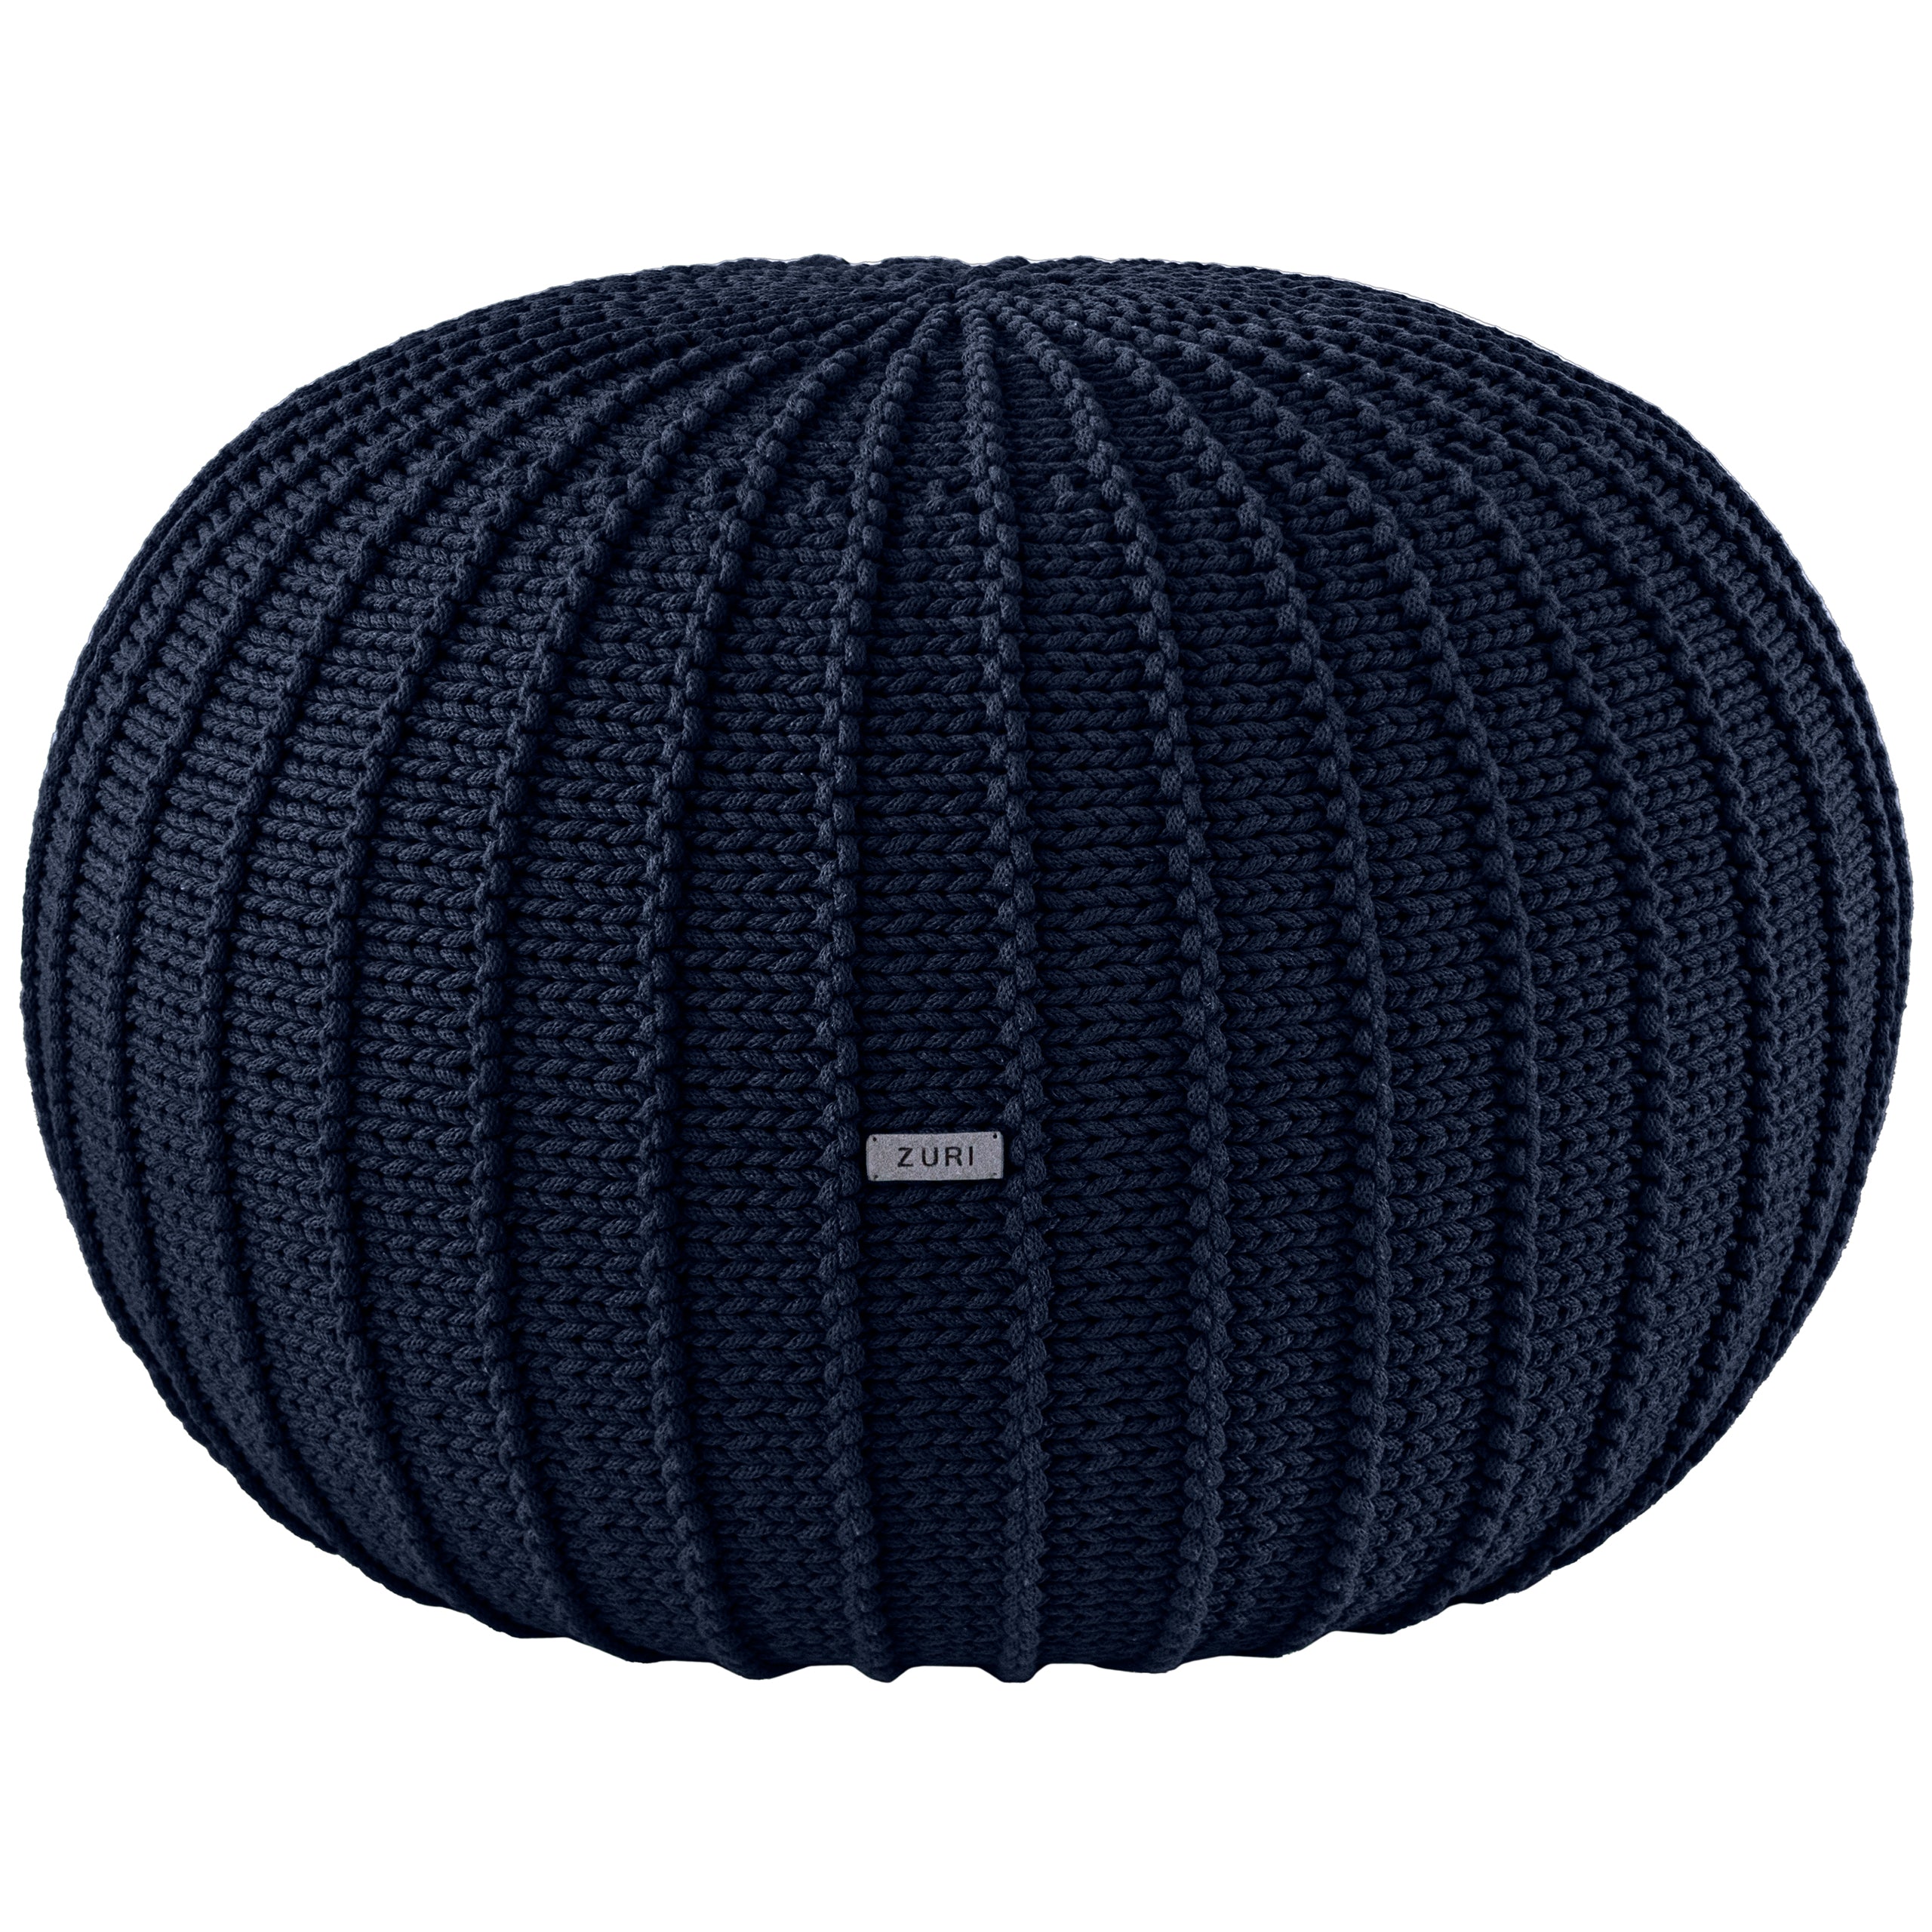 Knitted pouffe, Large | NAVY BLUE